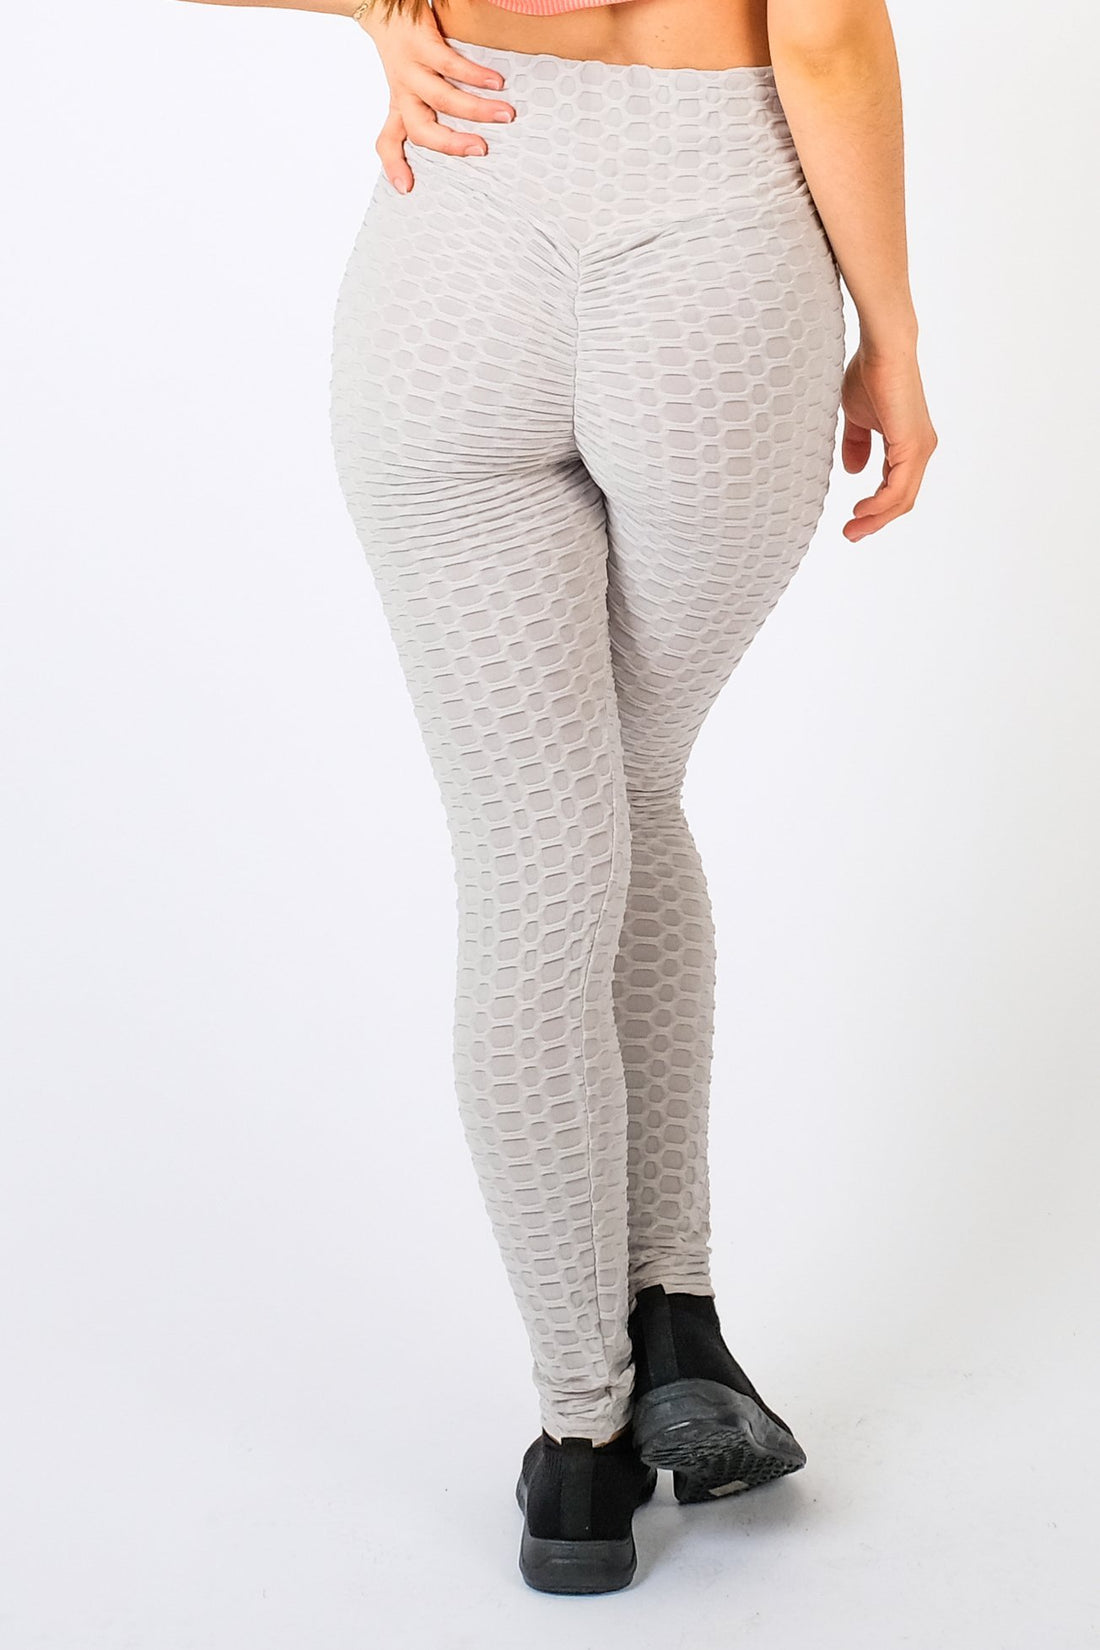 Honeycomb - Waffle Textured Active Wear Stretch Leggings - Pinstripe